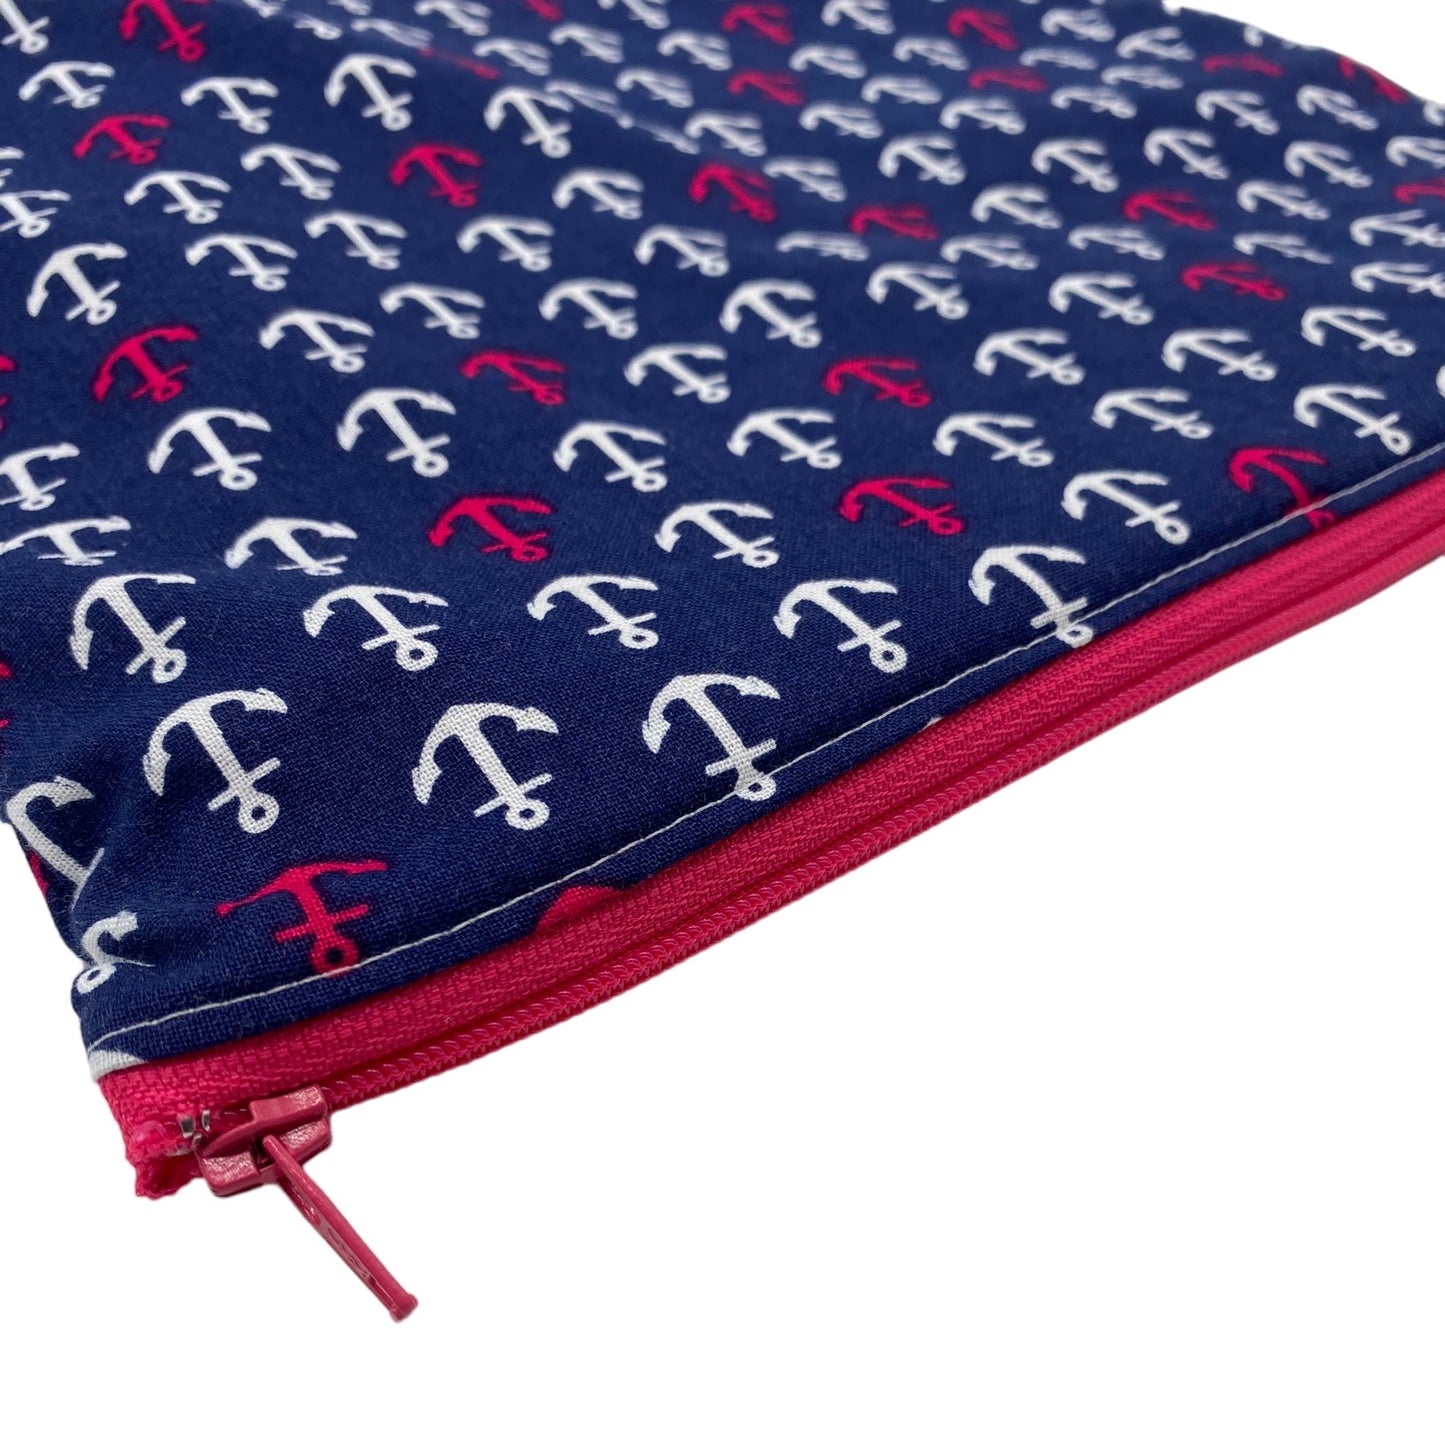 Gallon Sized Reusable Zippered Bag Anchors Pink on Navy